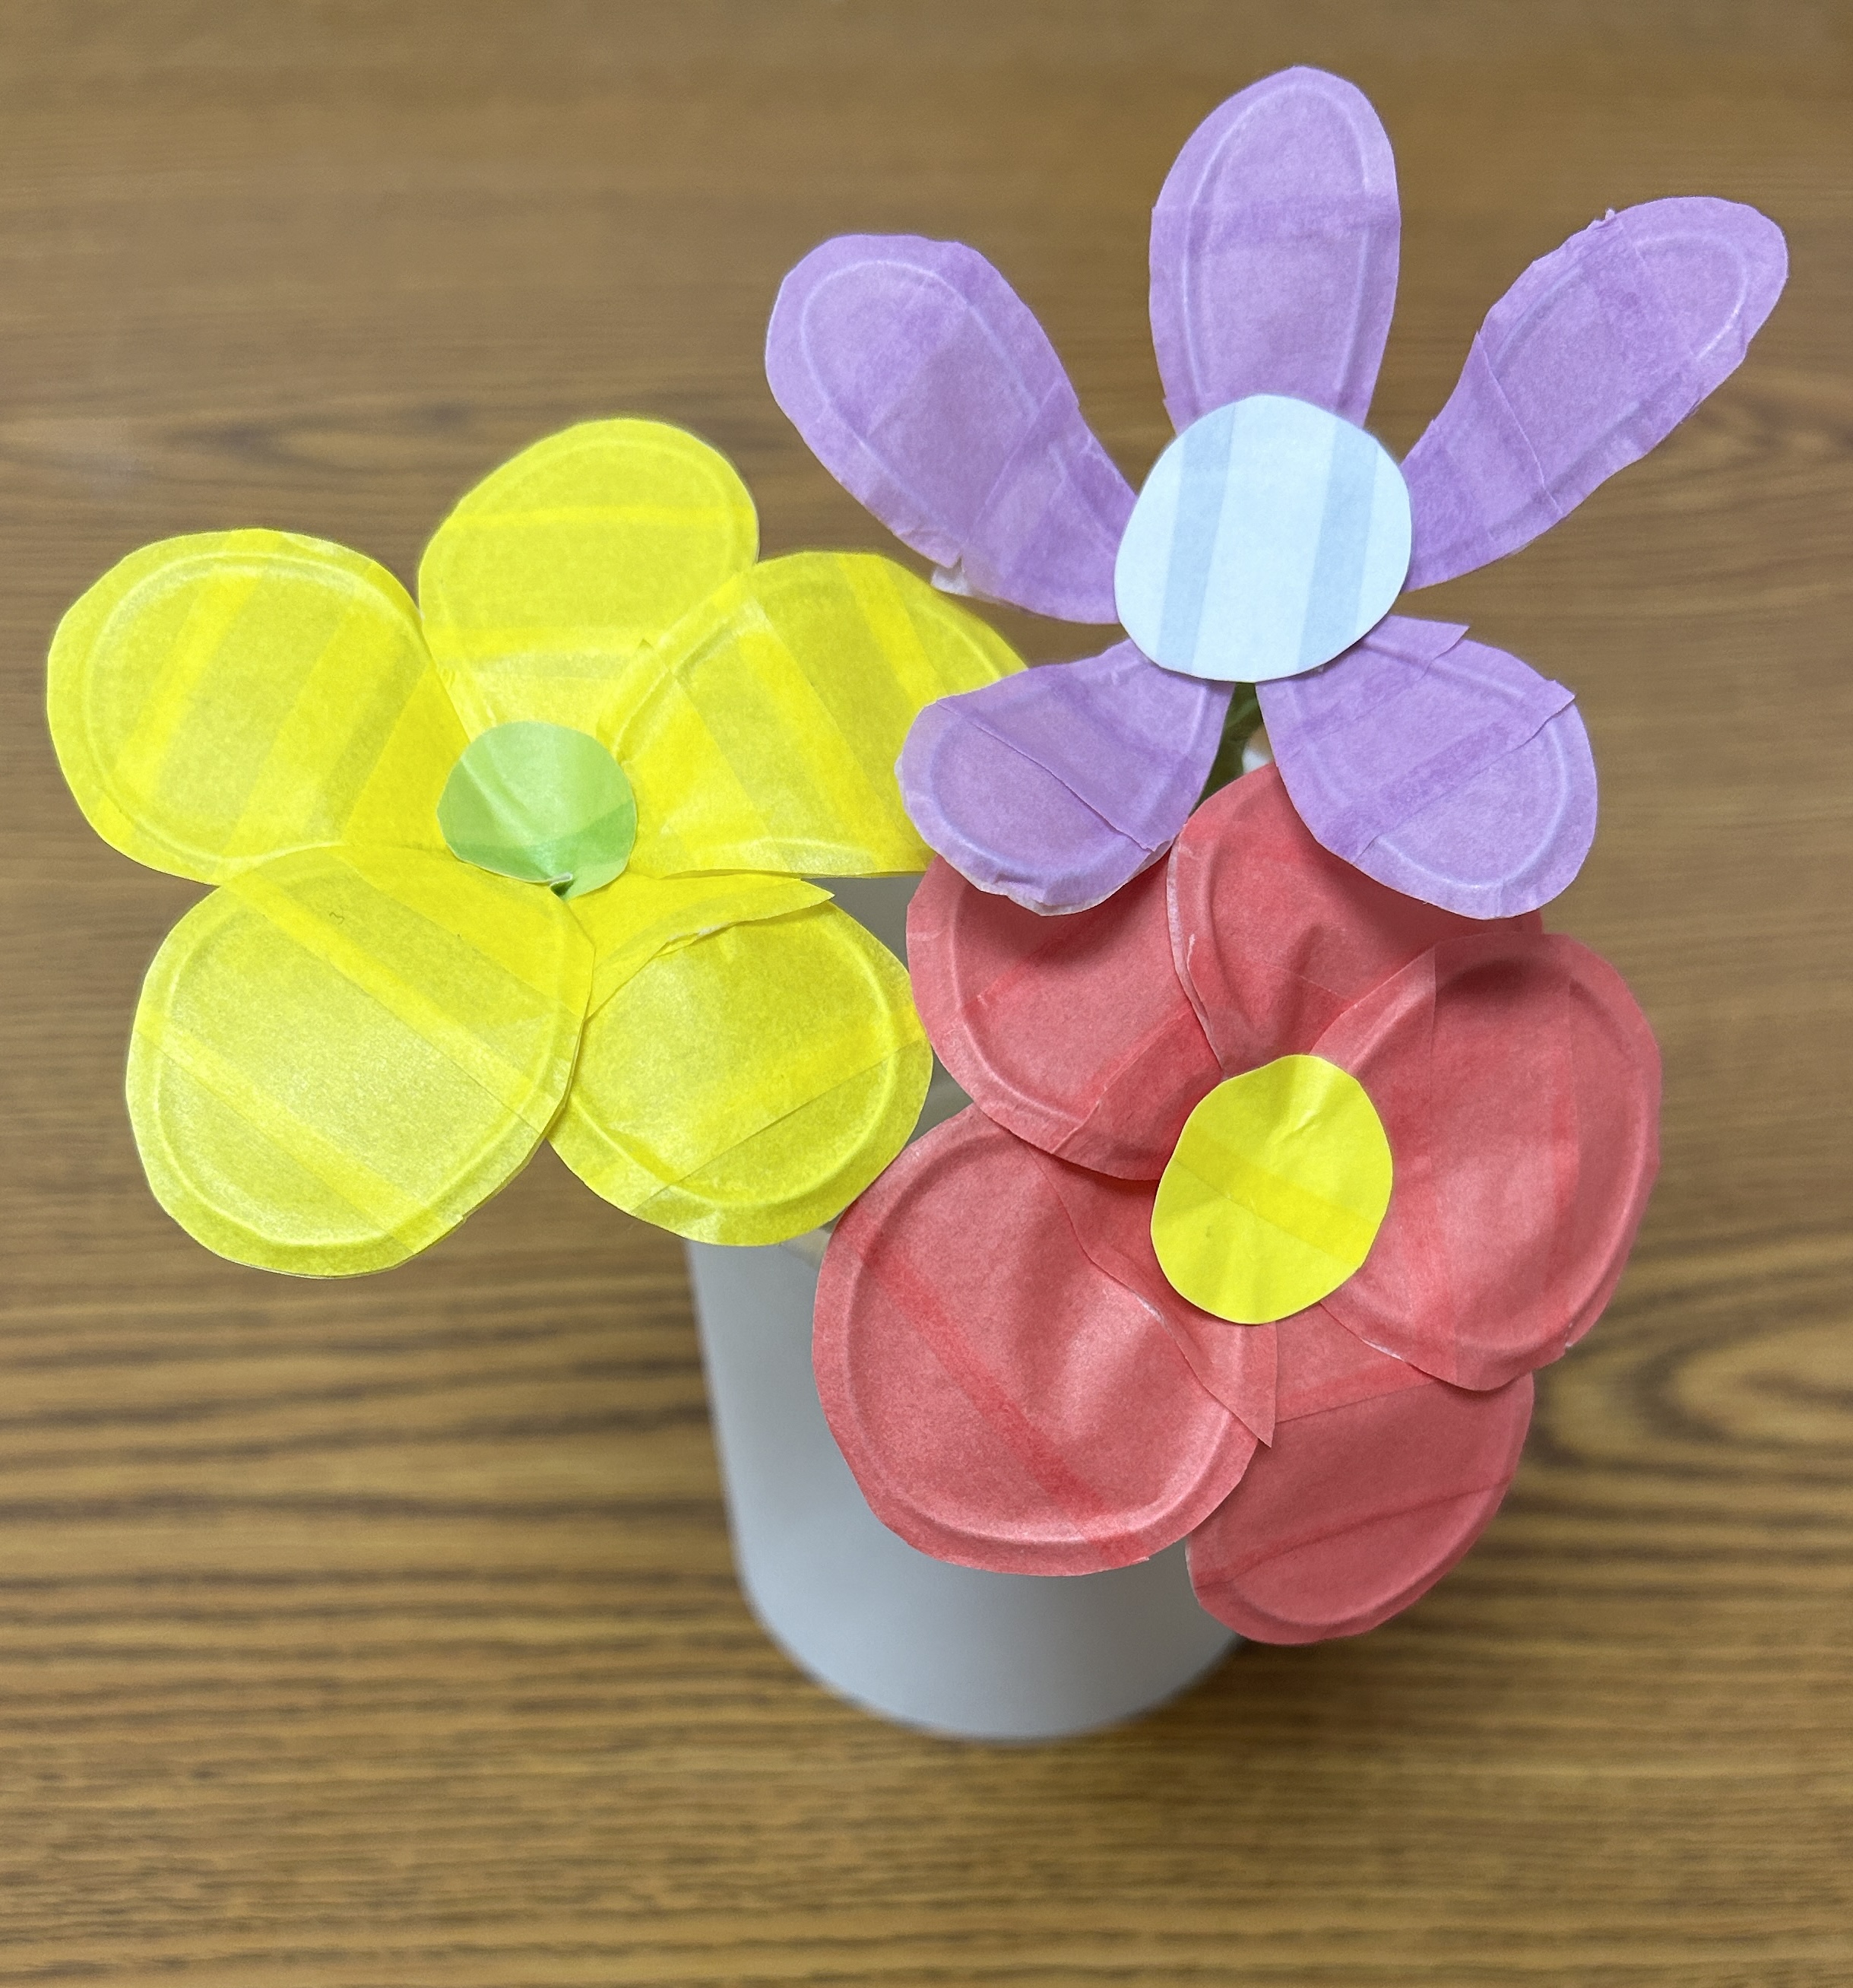 Three flowers made of washi tape in a white vase